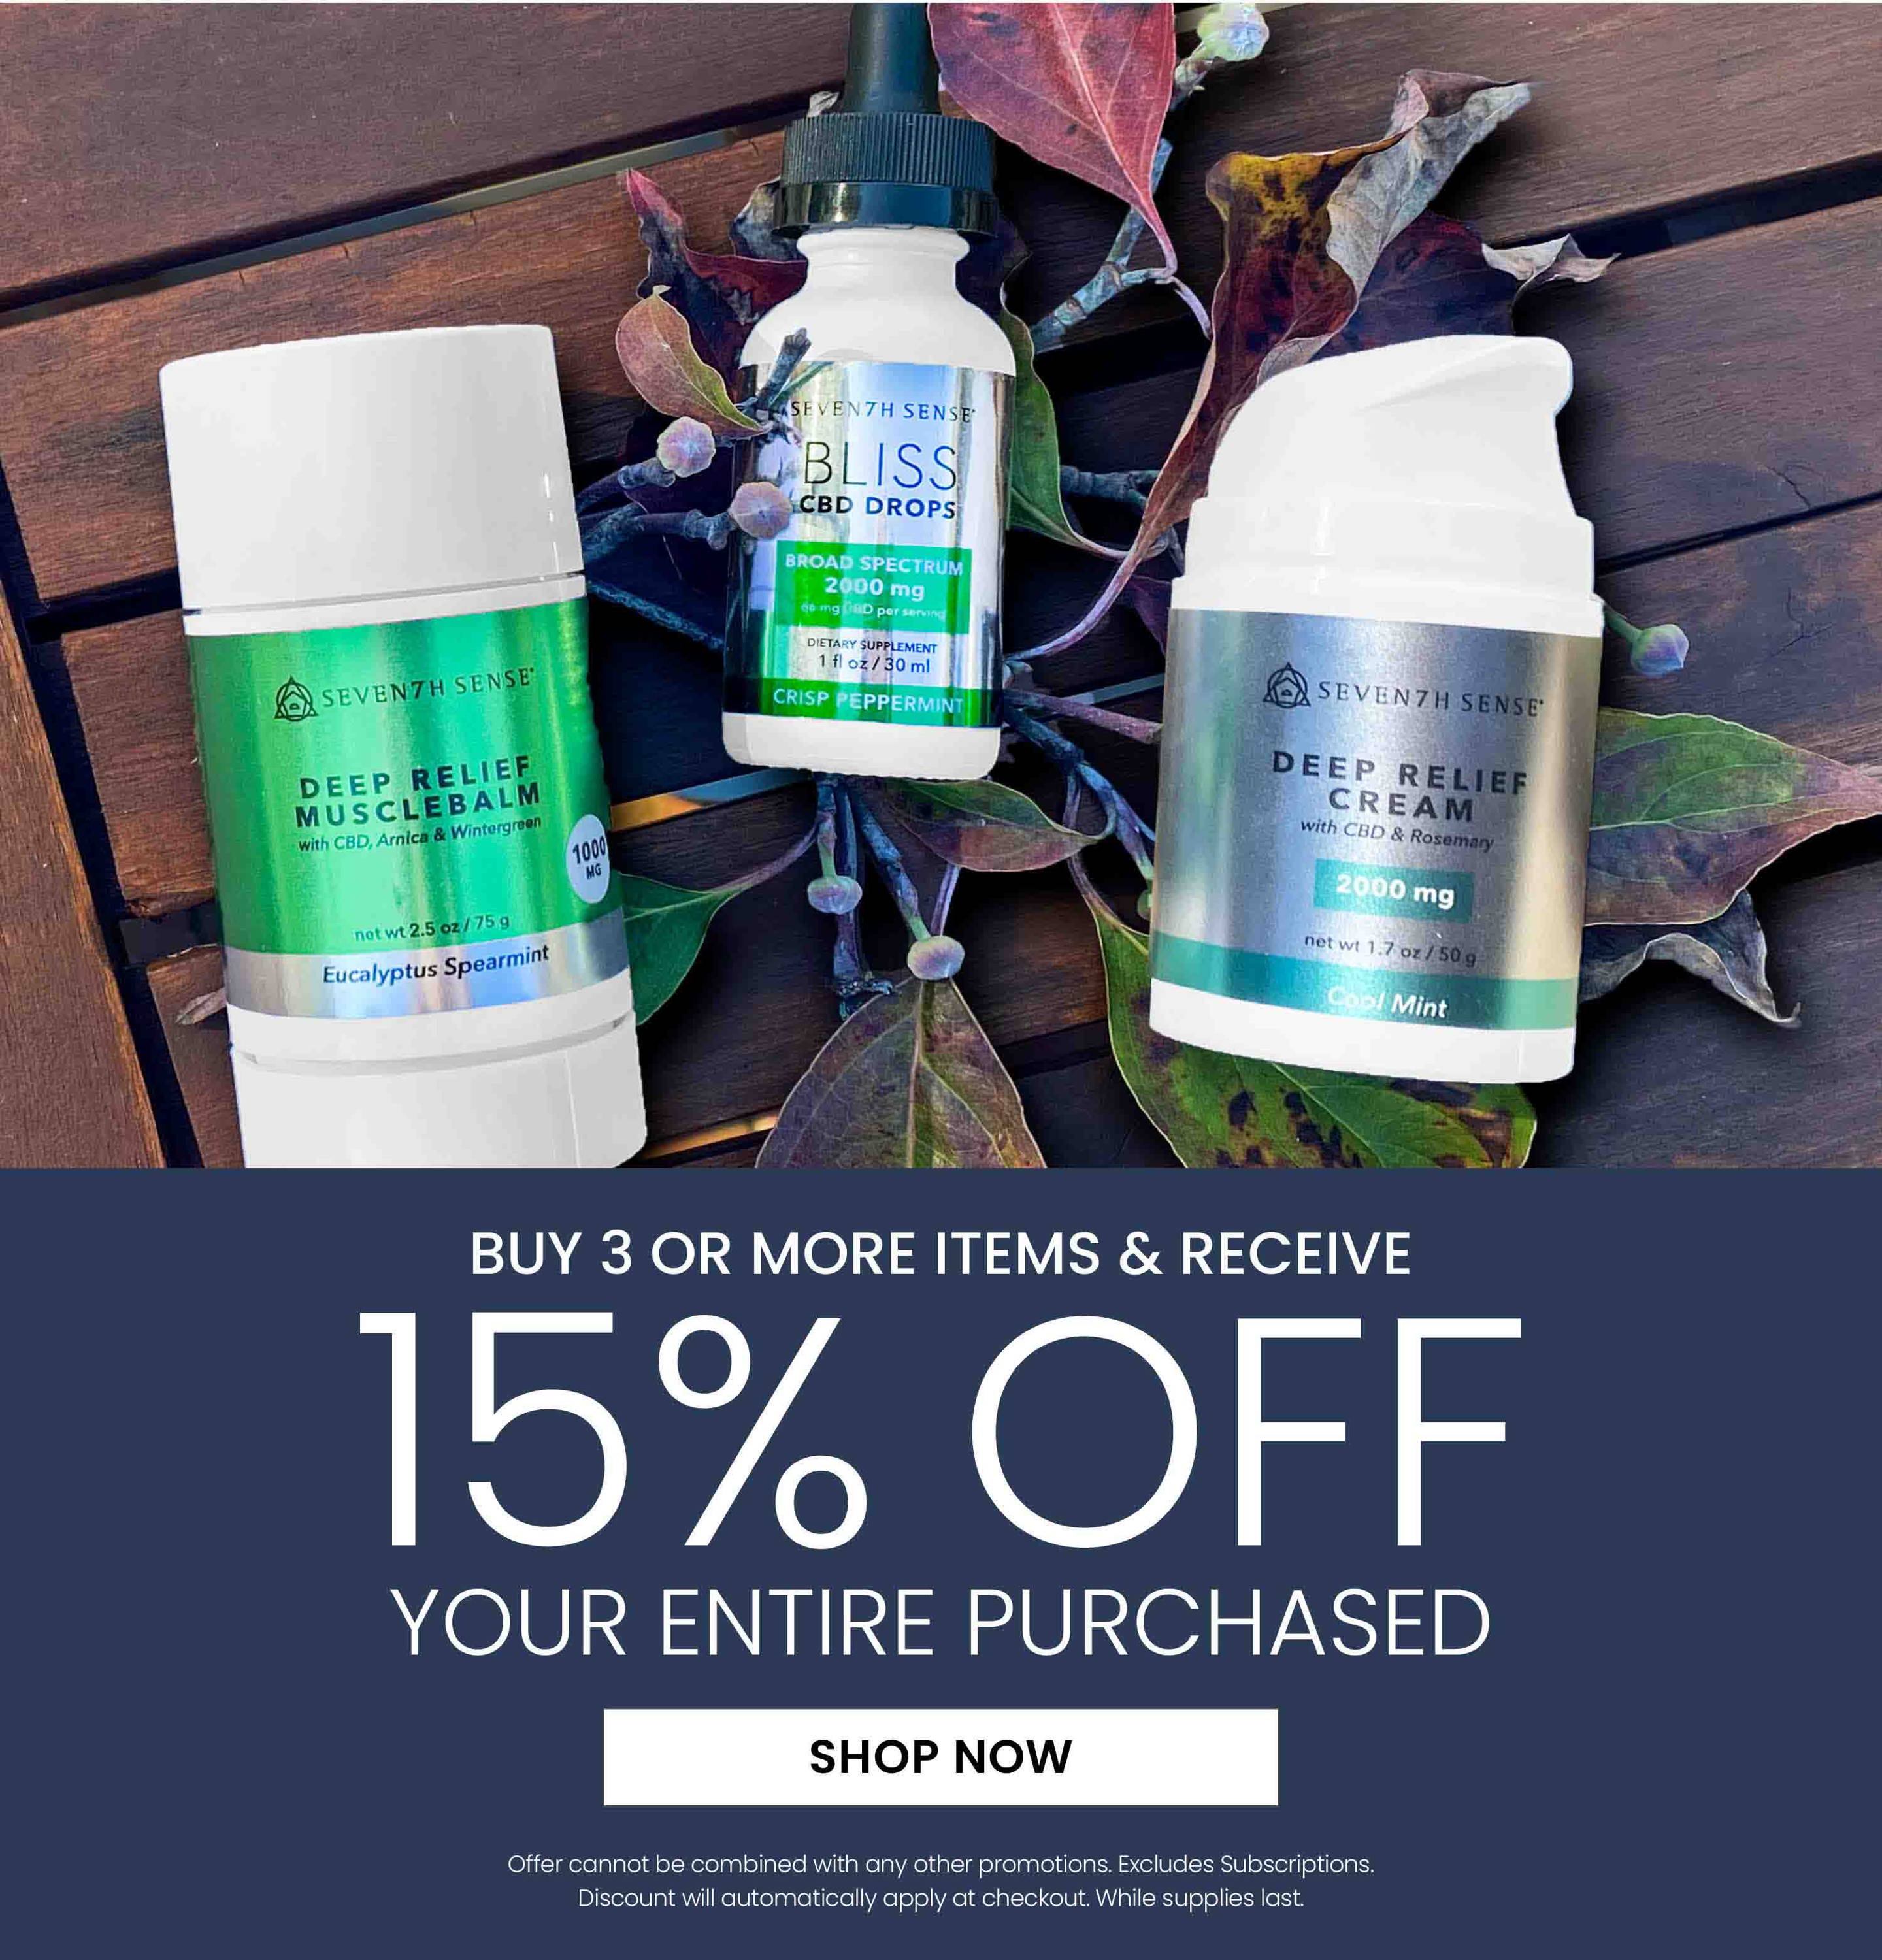 Buy 3 or More Items and Receive 15% Off Your Entire Purchase. Shop Now.